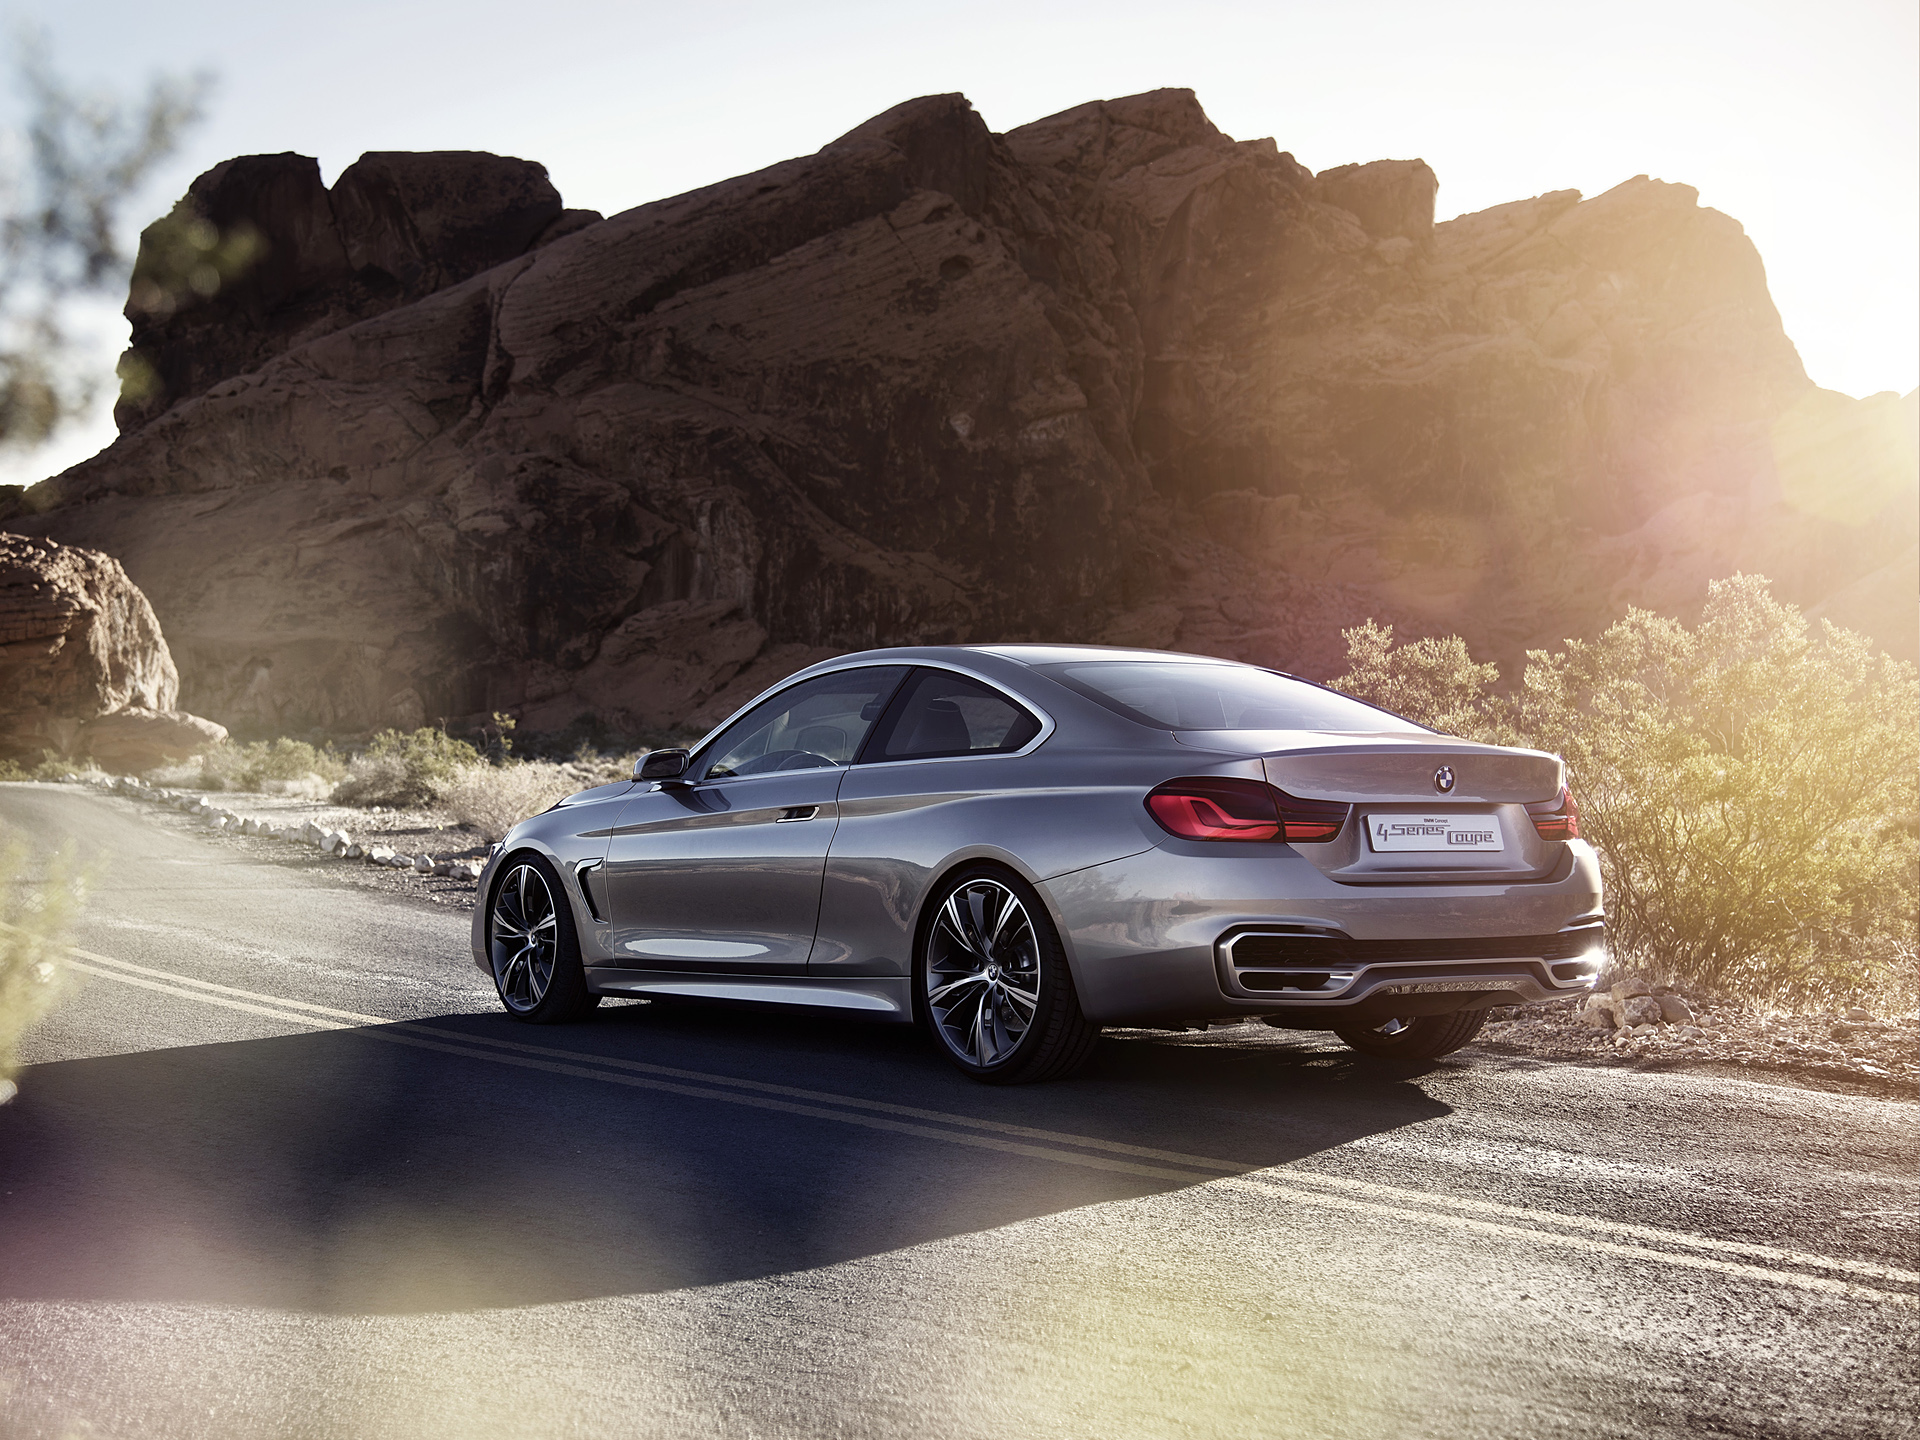  2013 BMW 4-Series Coupe Concept Wallpaper.